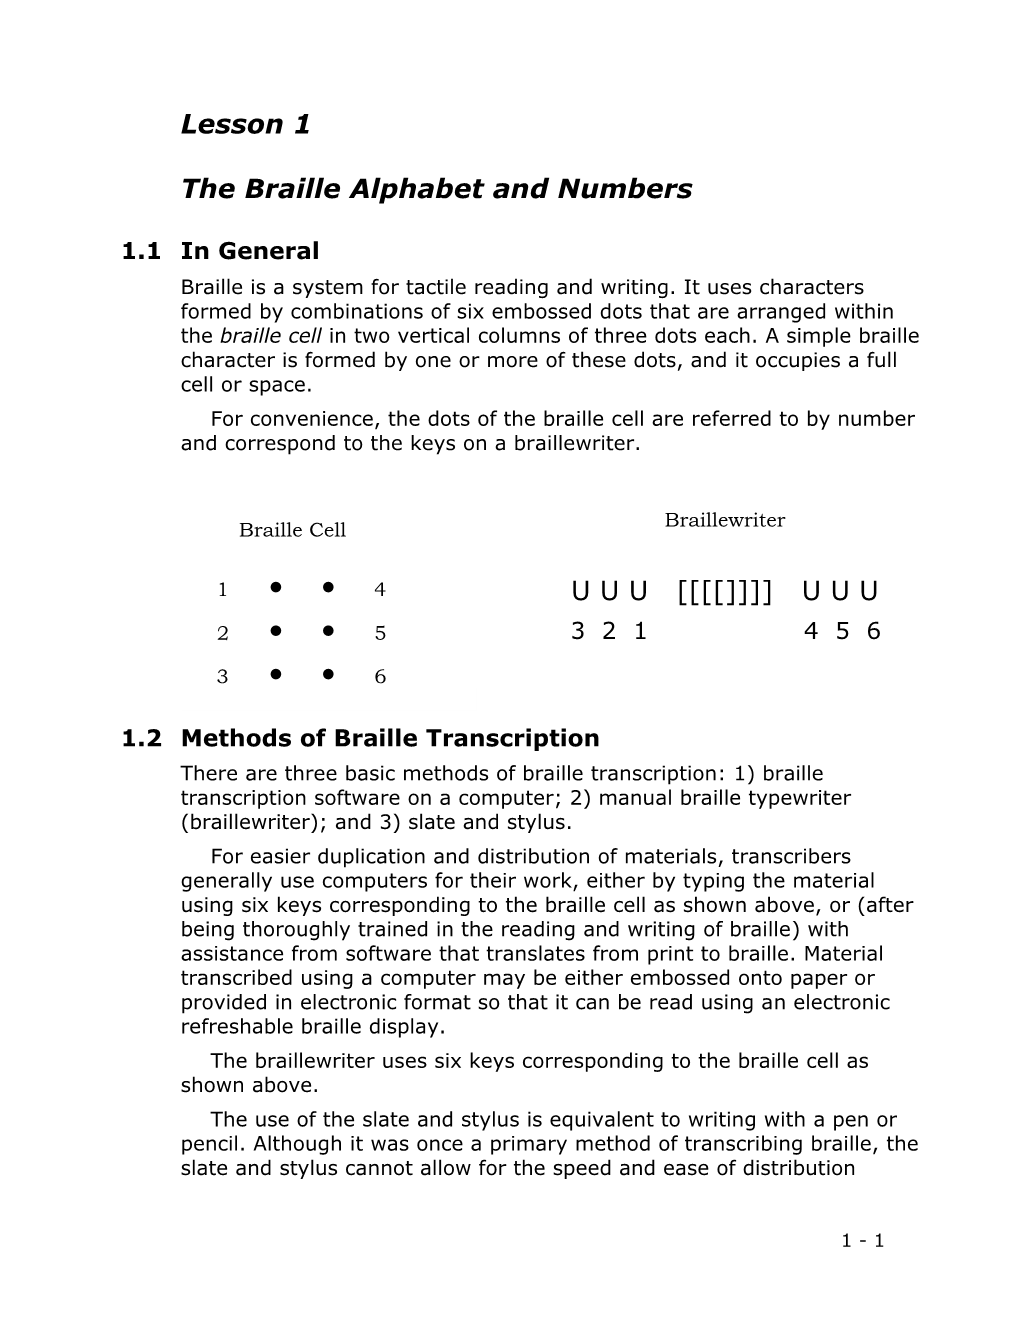 Lesson 1 the Braille Alphabet and Numbers